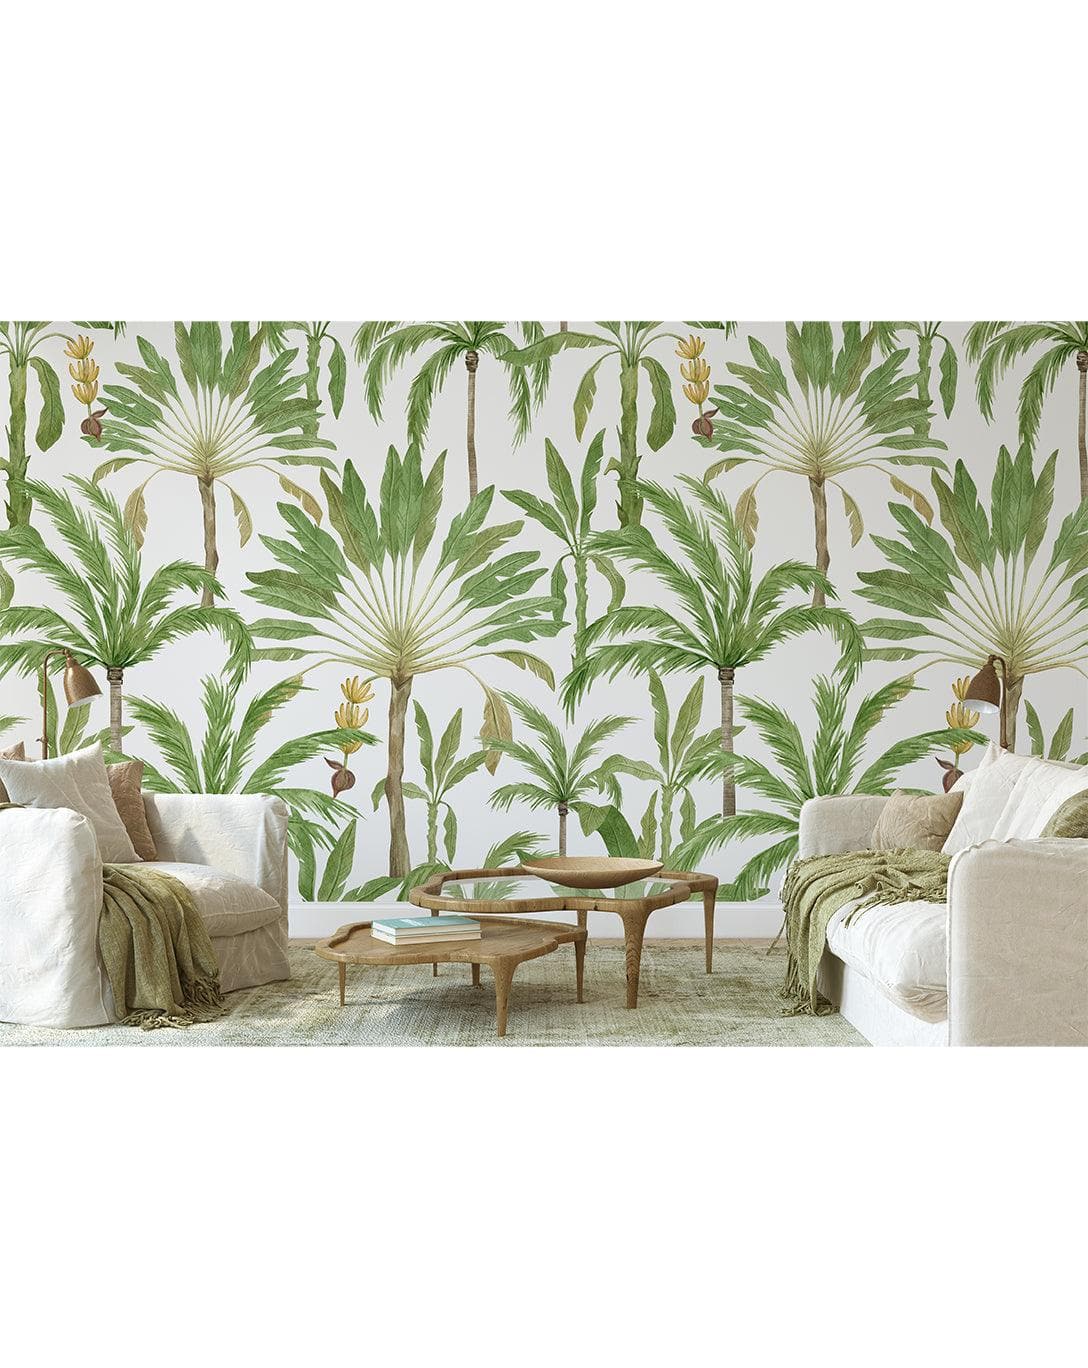 Green Tropical Leaves Removable Wallpaper Green Tropical Leaves Removable Wallpaper Exotic Palms Tropical Wall Mural 